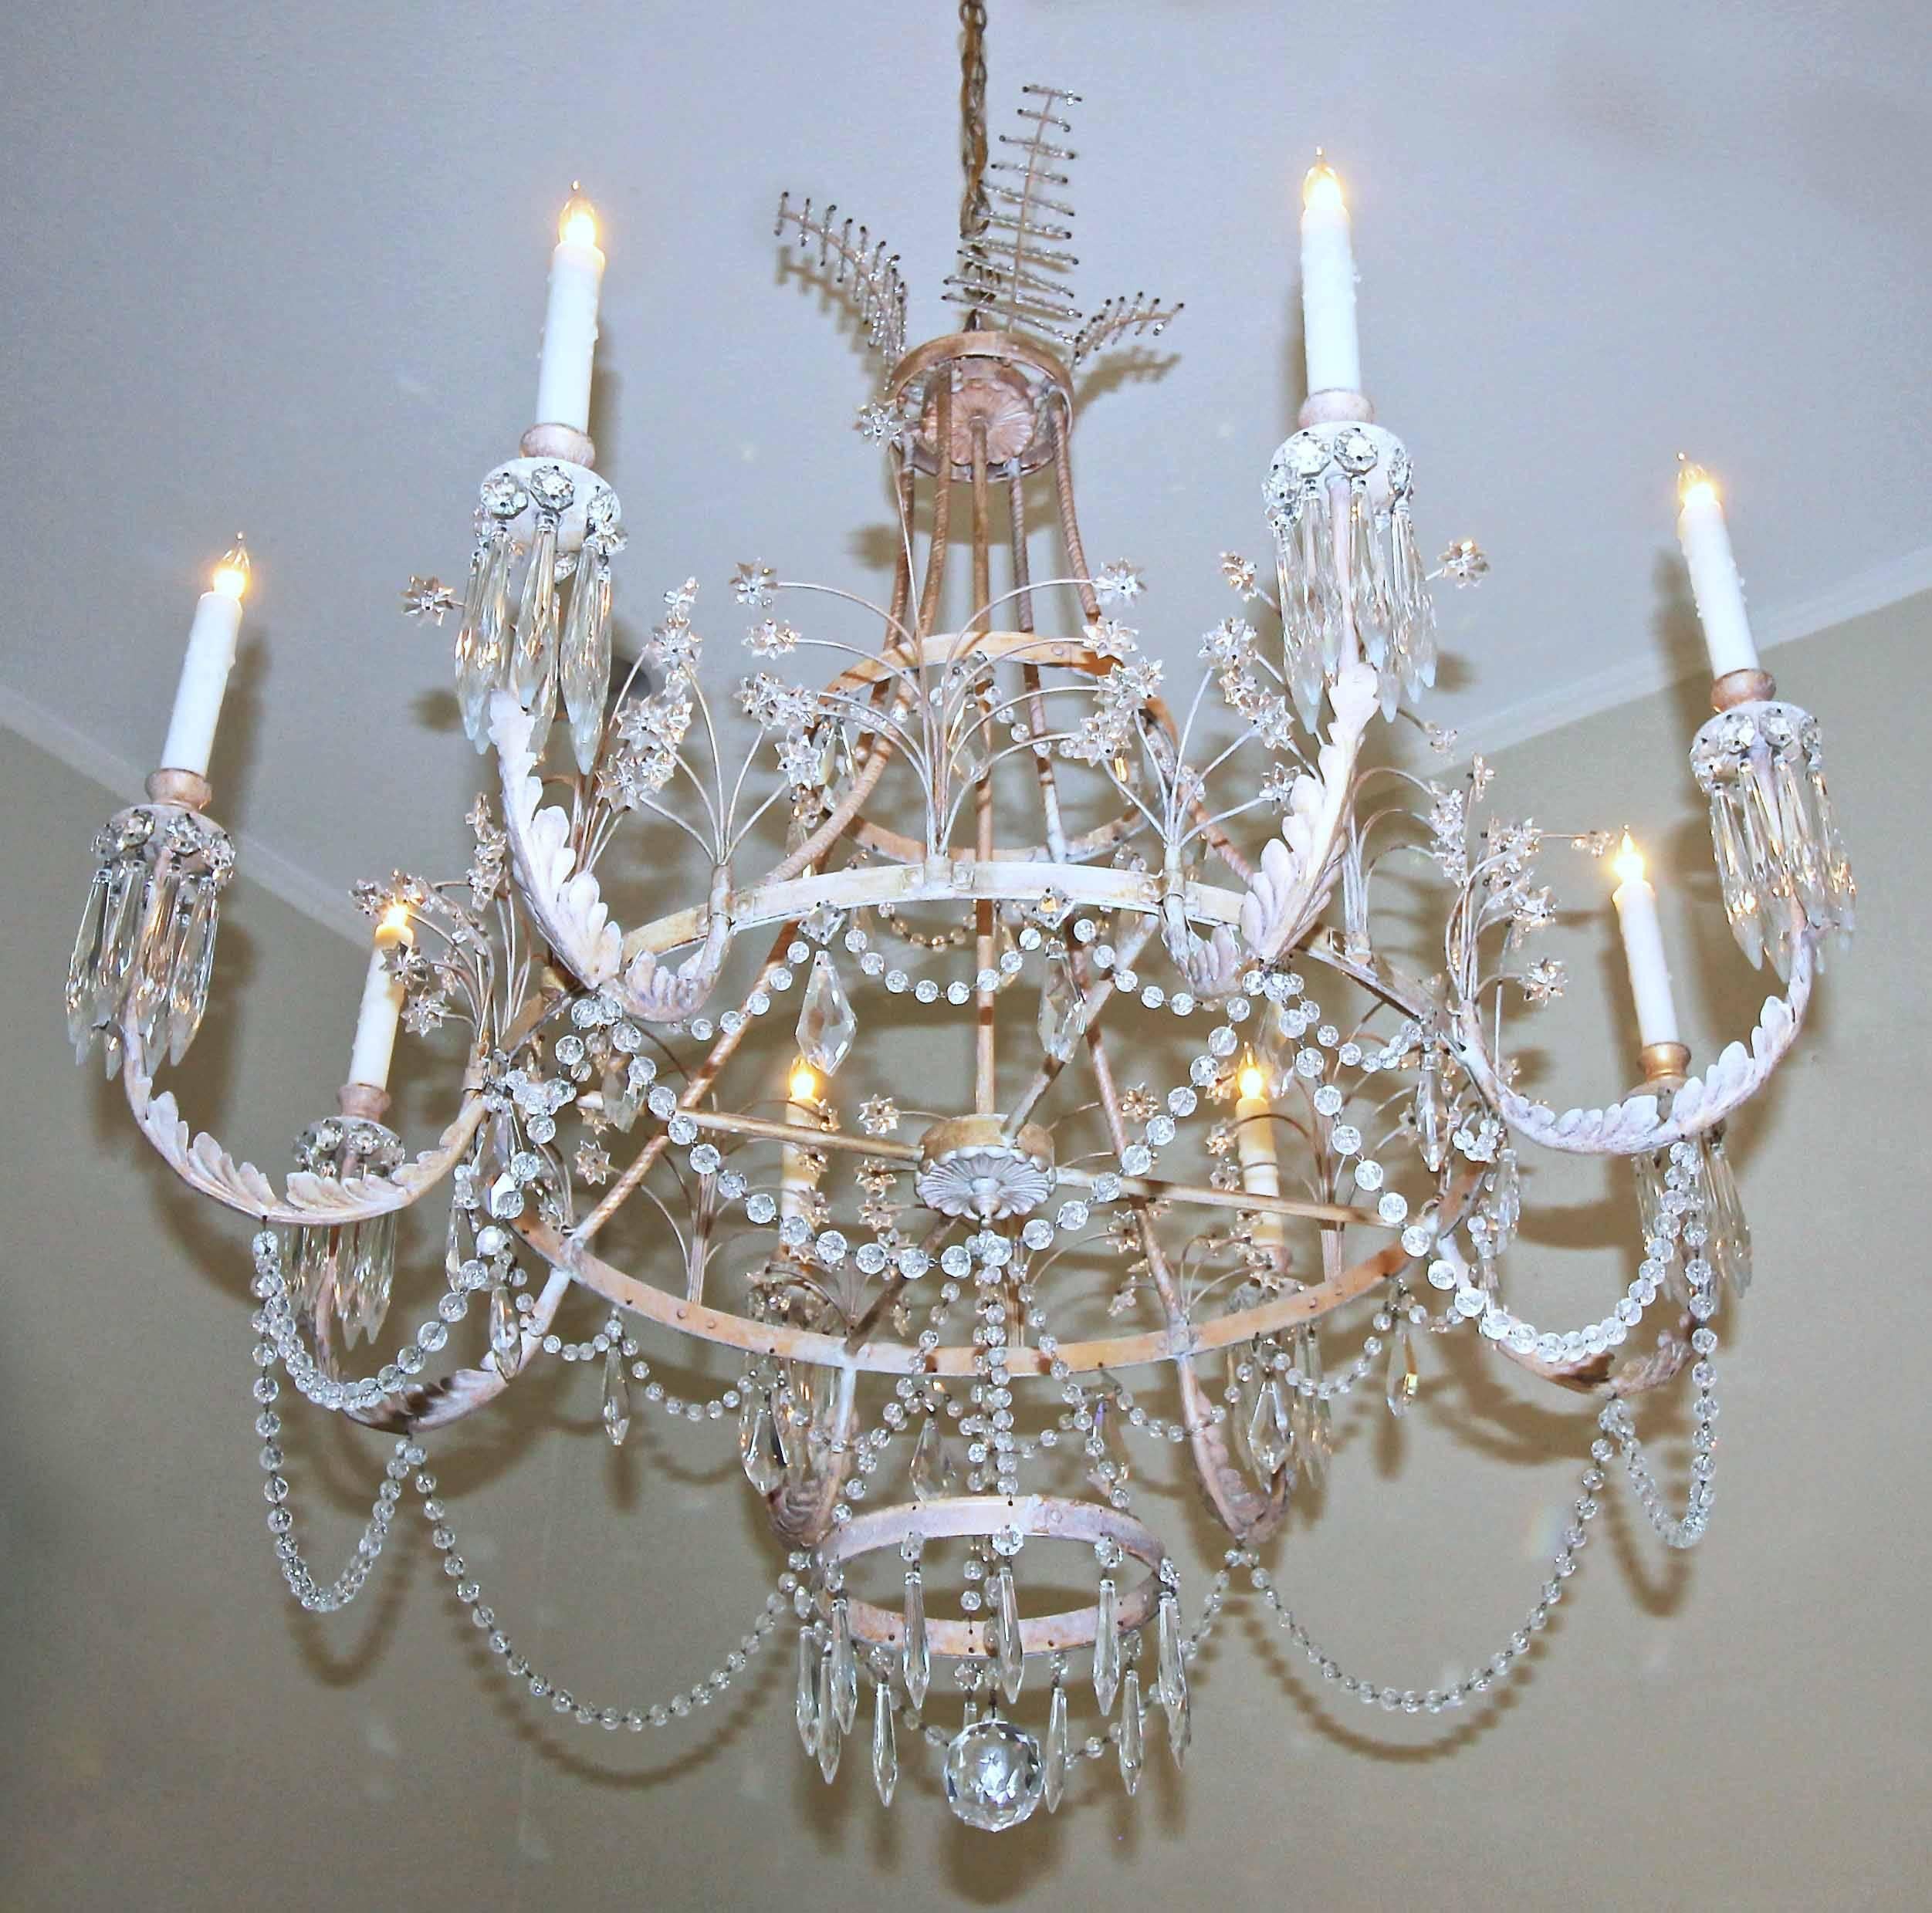 Large Swedish style eight-arm chandelier in crystal and pickled gold leaf finish on metal frame by Niermann Weeks. Delicate details reminiscent of 18th century Gustavian pieces in a large scale version. Newer wiring for the US. 

Height of